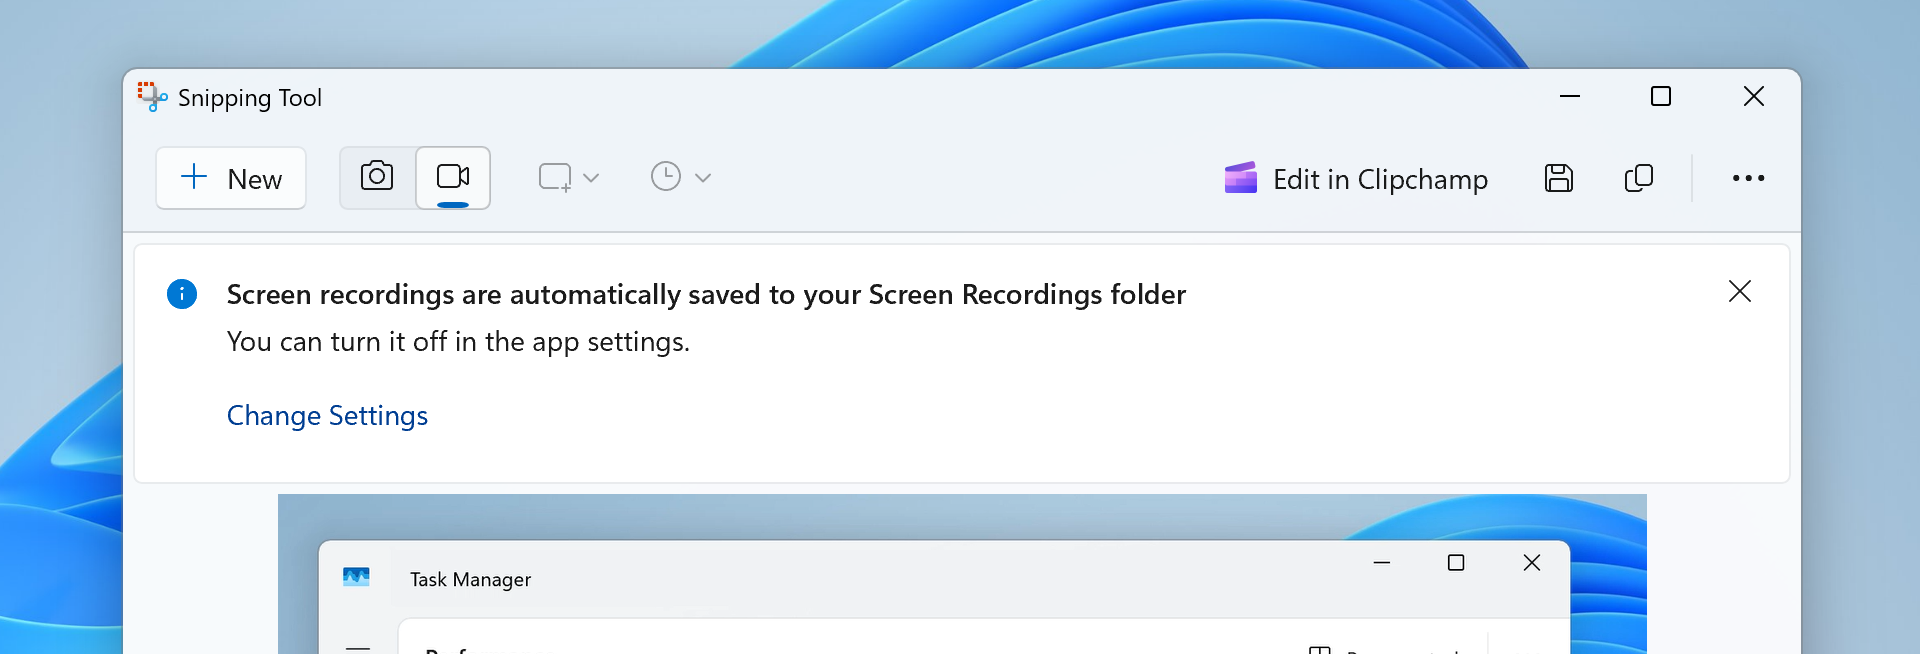 Snipping Tool showing new banner for screen recordings now automatically being saved to your Screen Recordings folder.